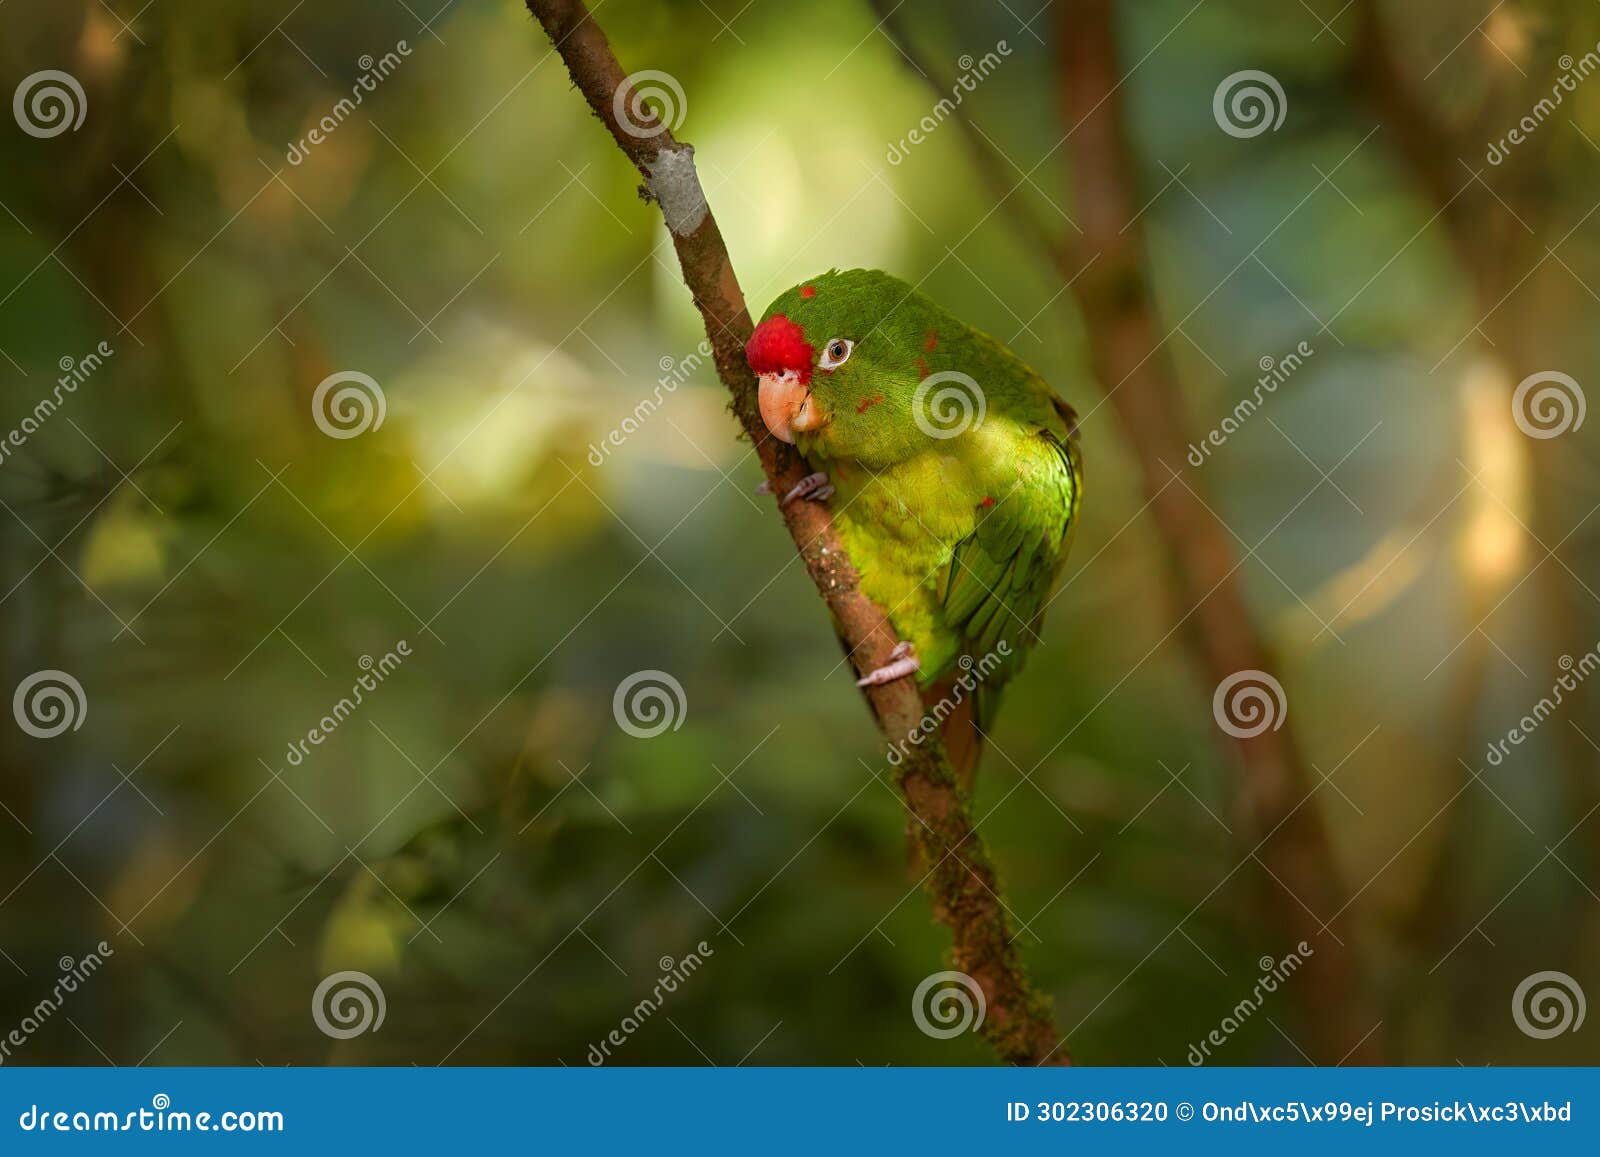 crimson-fronted parakeet, aratinga funschi, portrait of light green parrot with red head, costa rica. wildlife scene from tropical